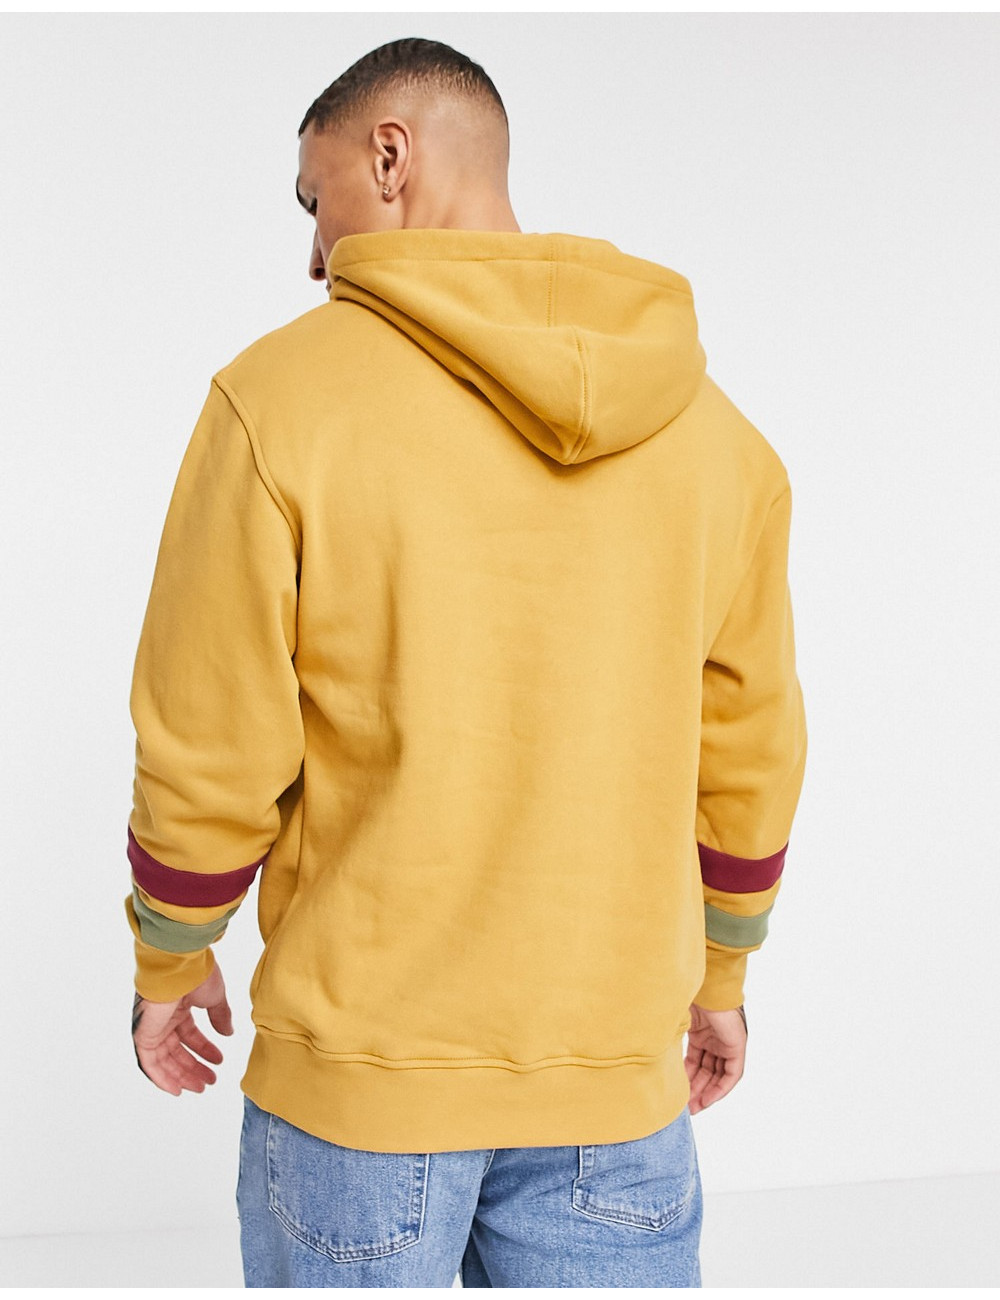 The Hundreds terrace hoodie...